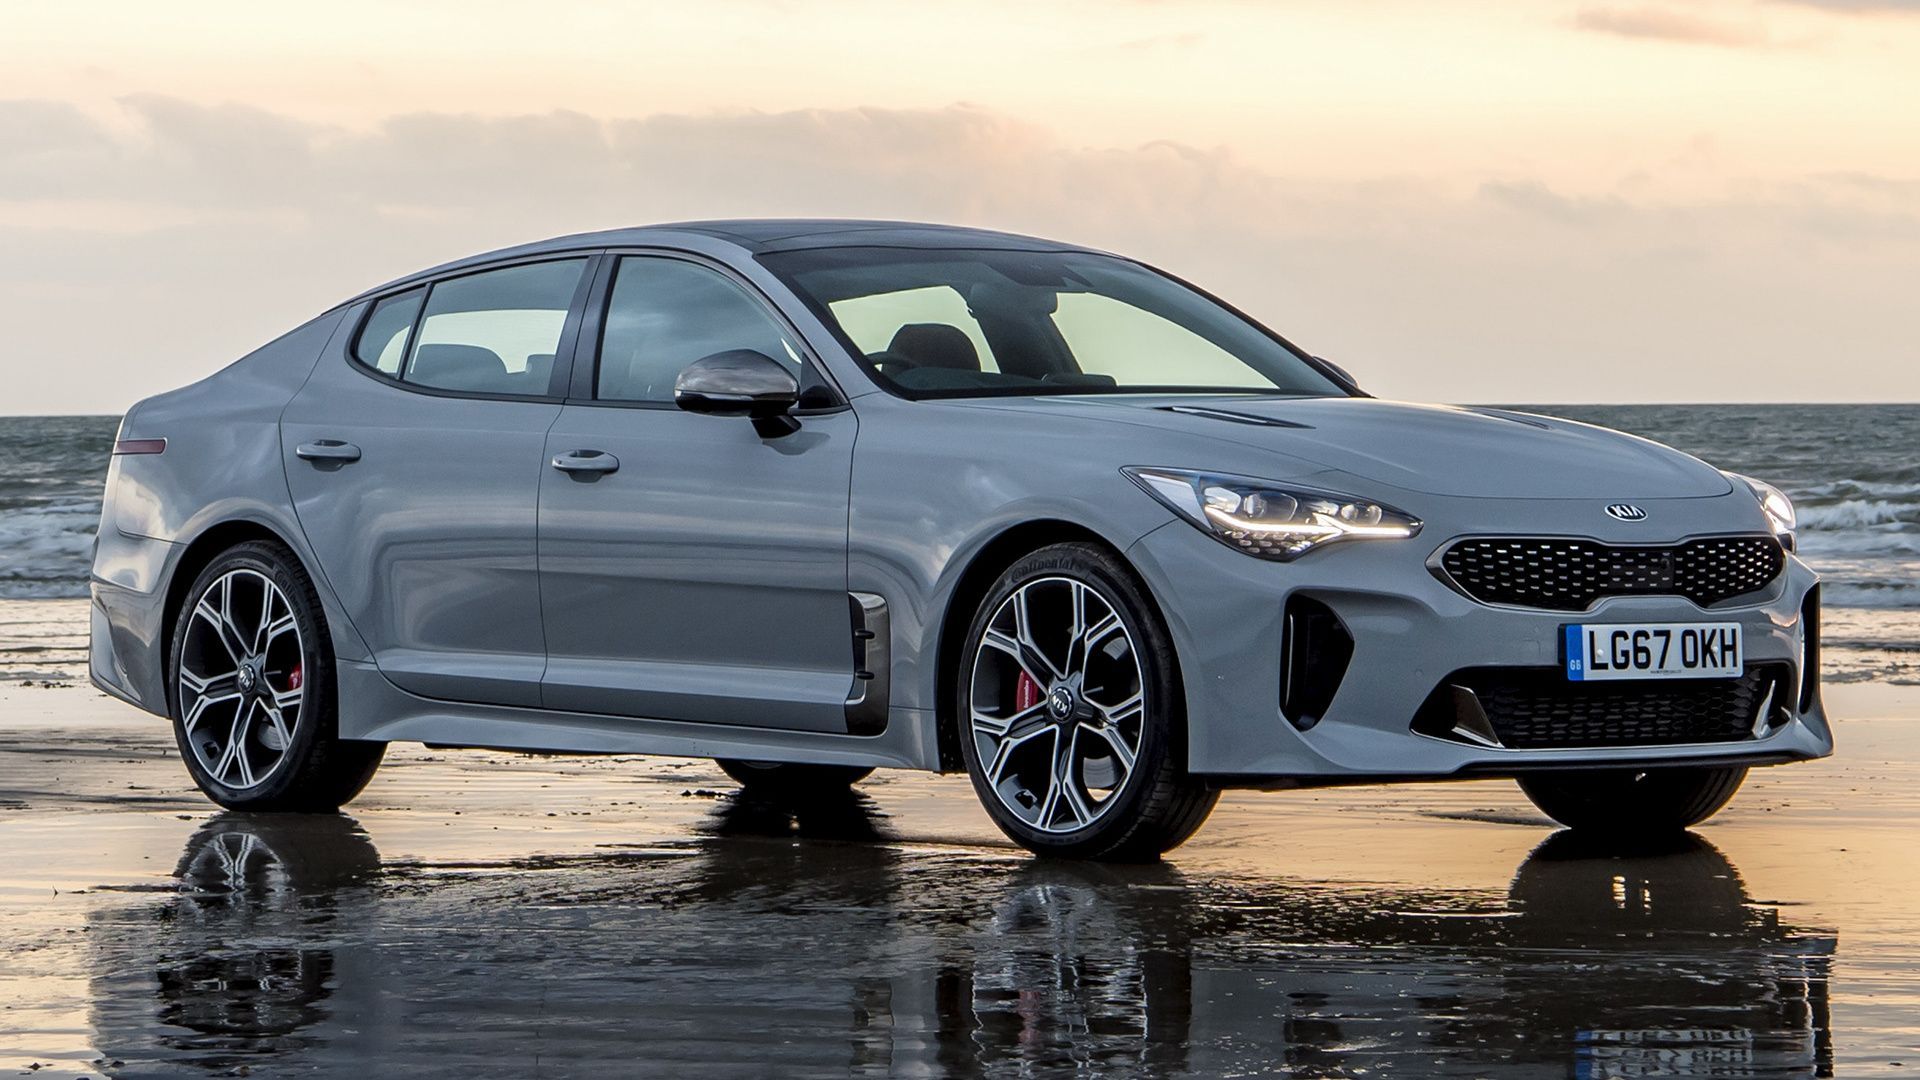 Kia Stinger HD Wallpapers and Backgrounds